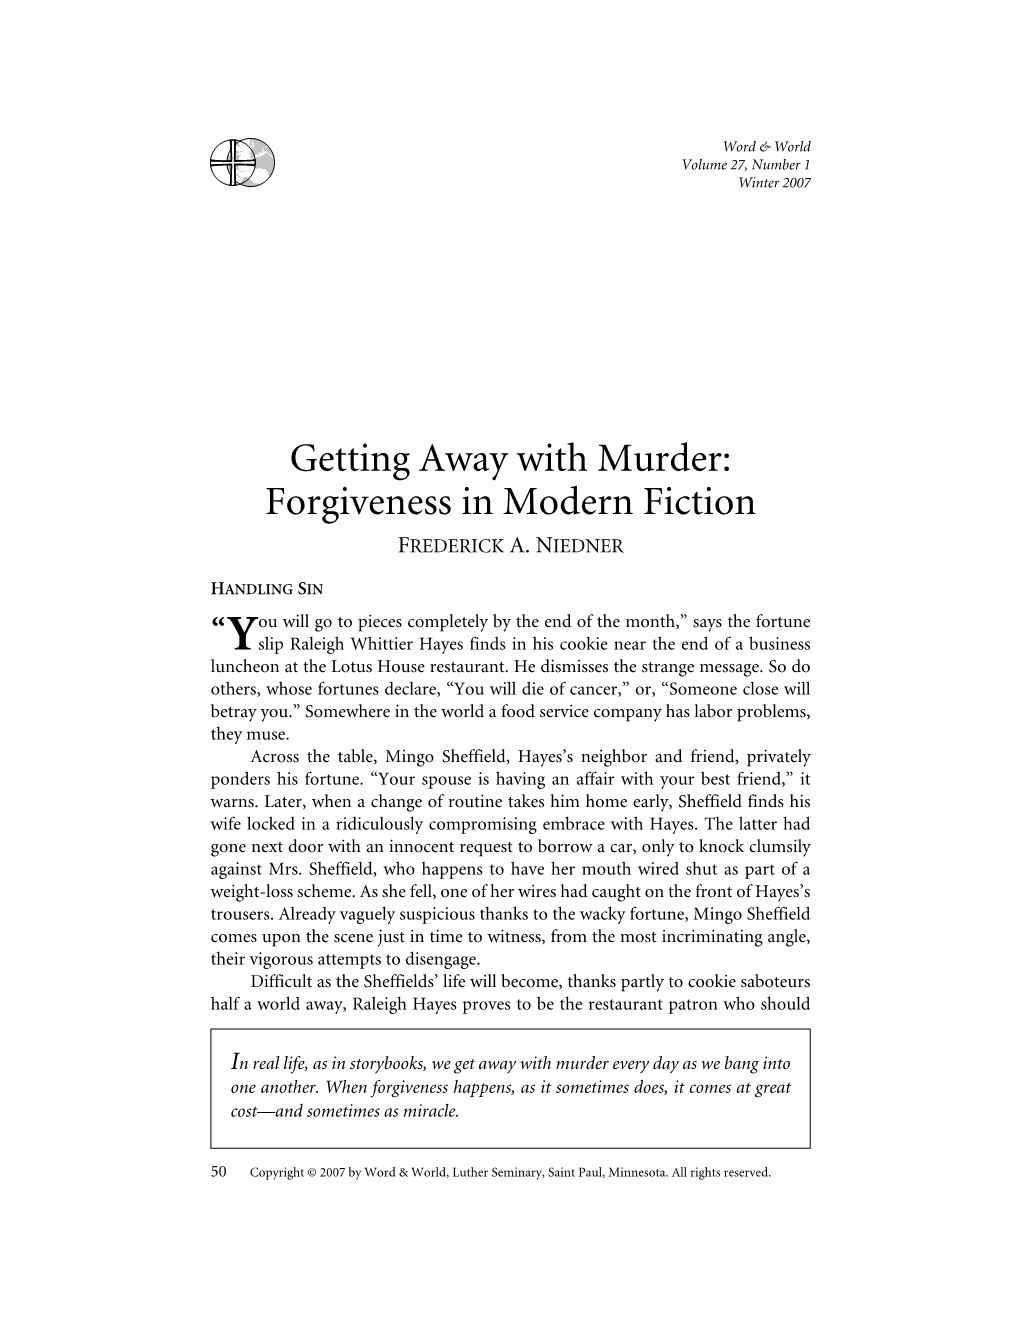 Forgiveness in Modern Fiction FREDERICK A